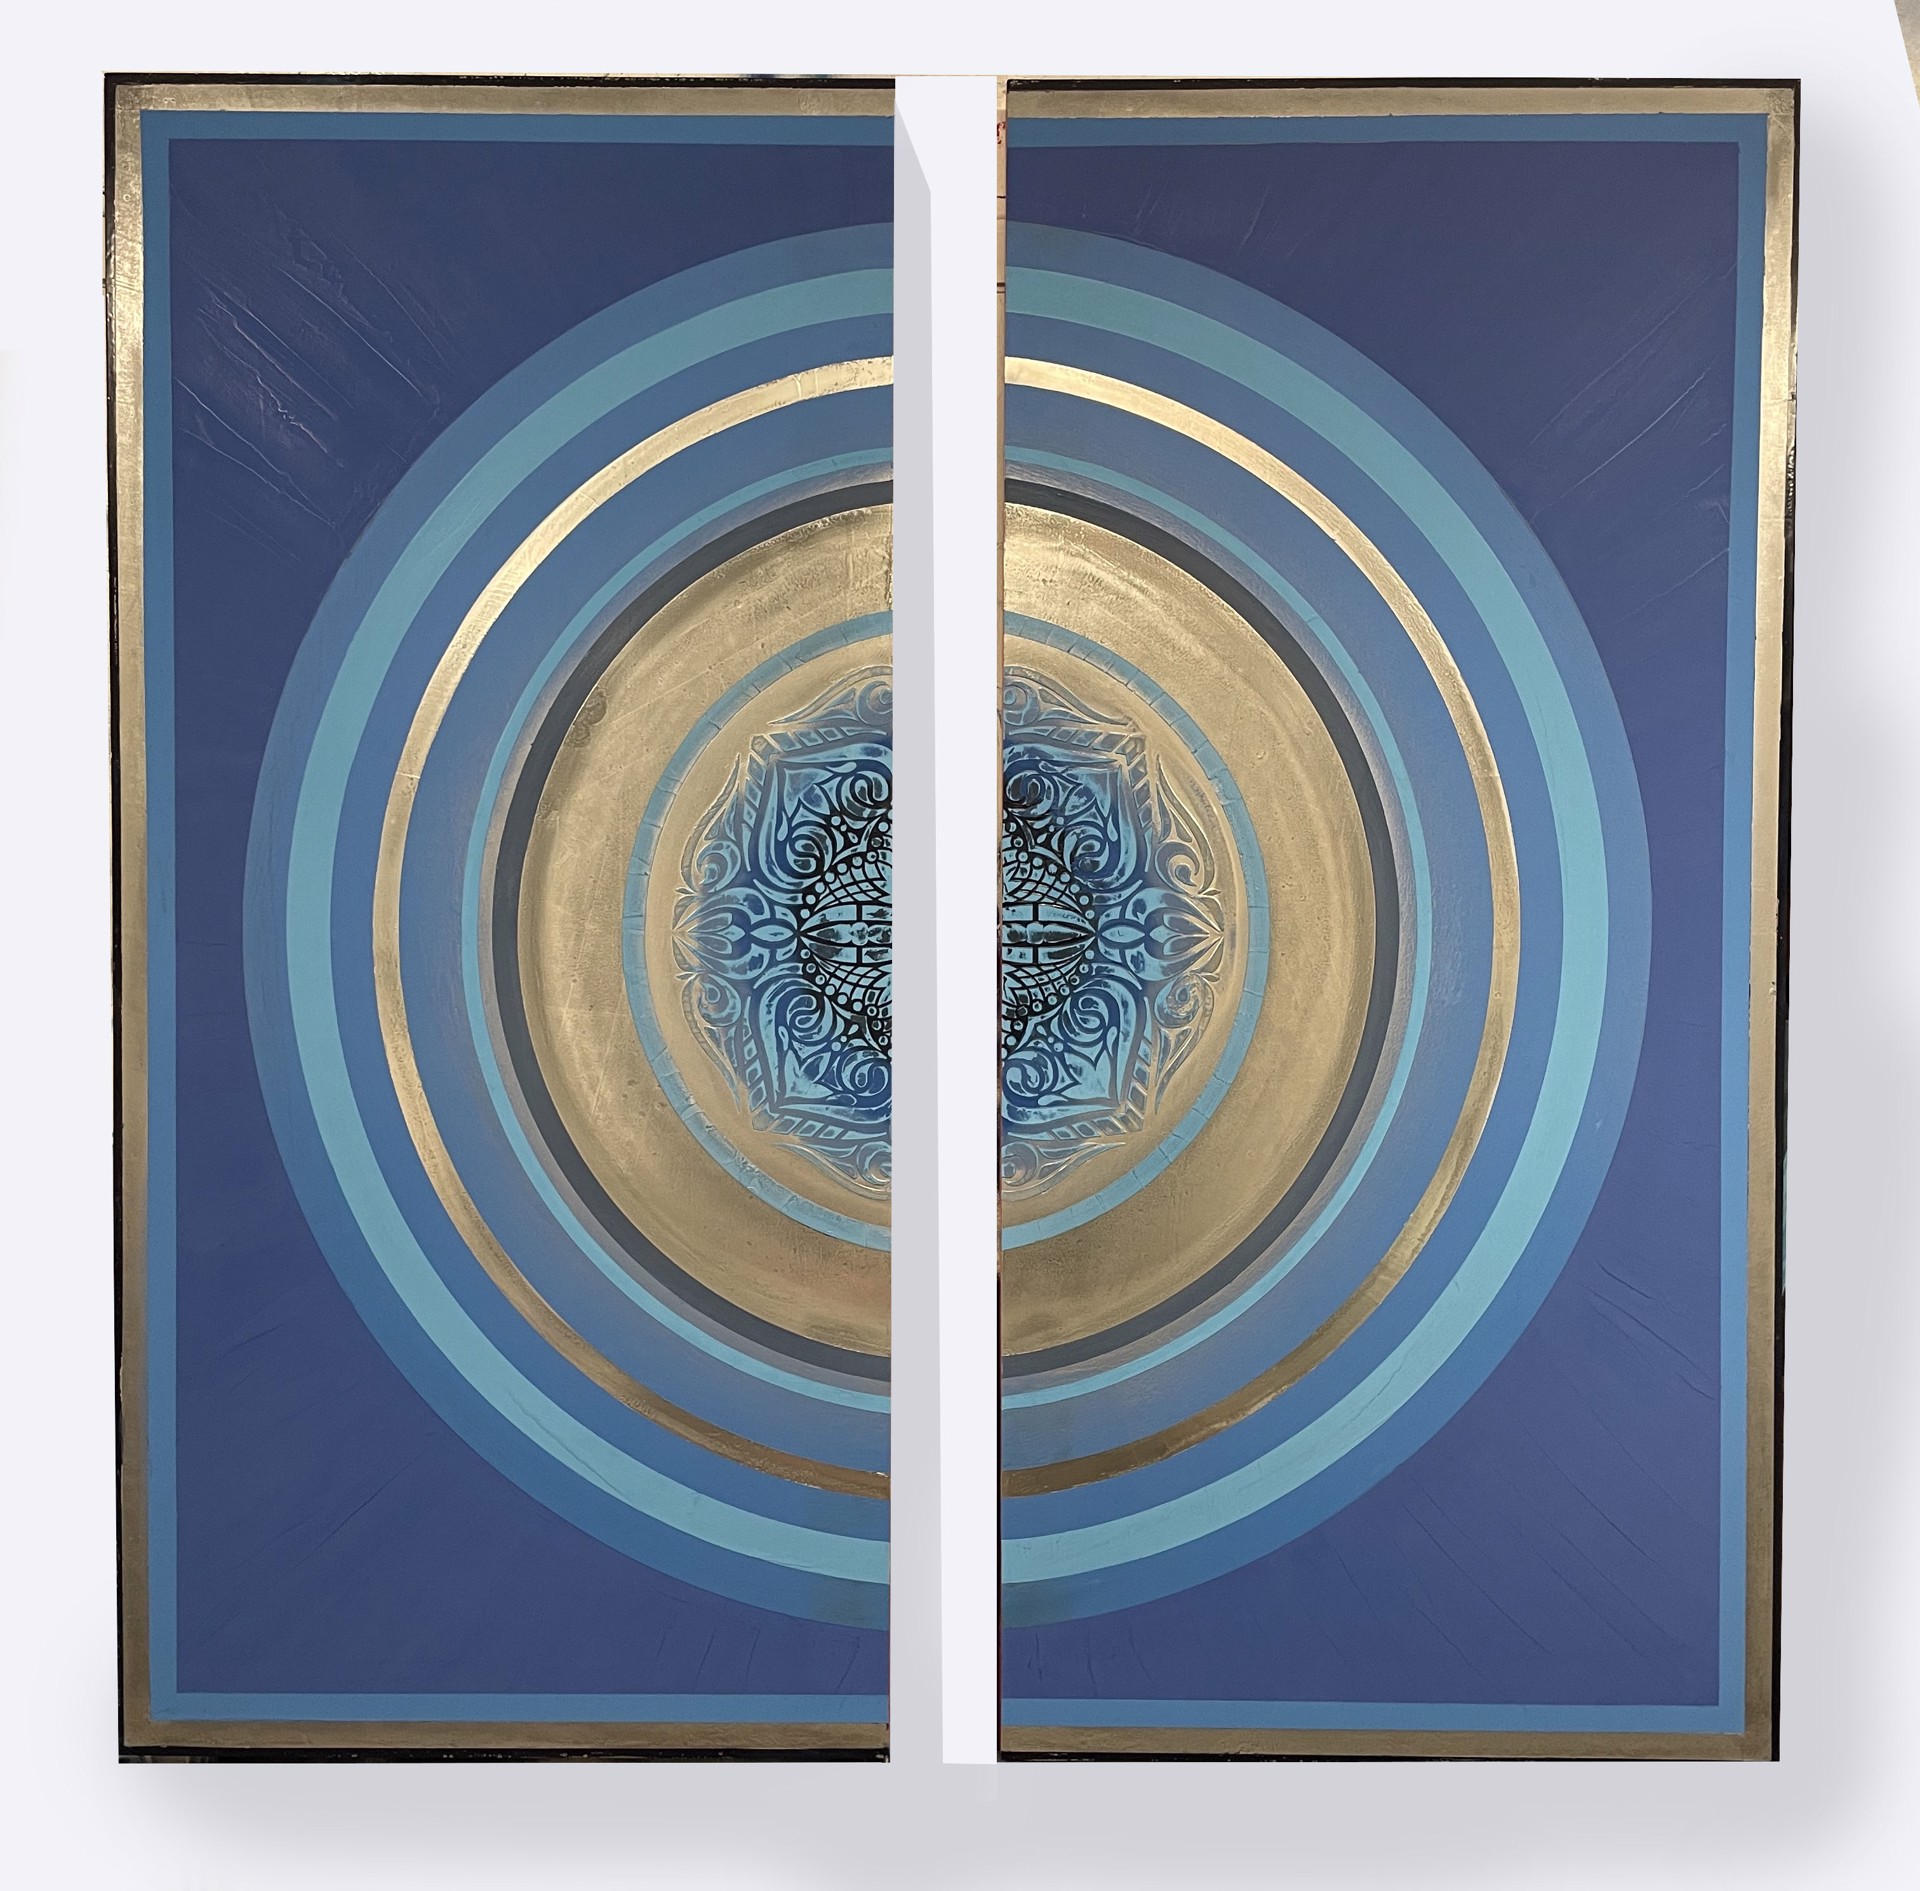 California artist and painter Stephanie Paige's painting Arya is a beautiful diptych made of two wood panels with layers of blue marble plaster paint and champagne circles.